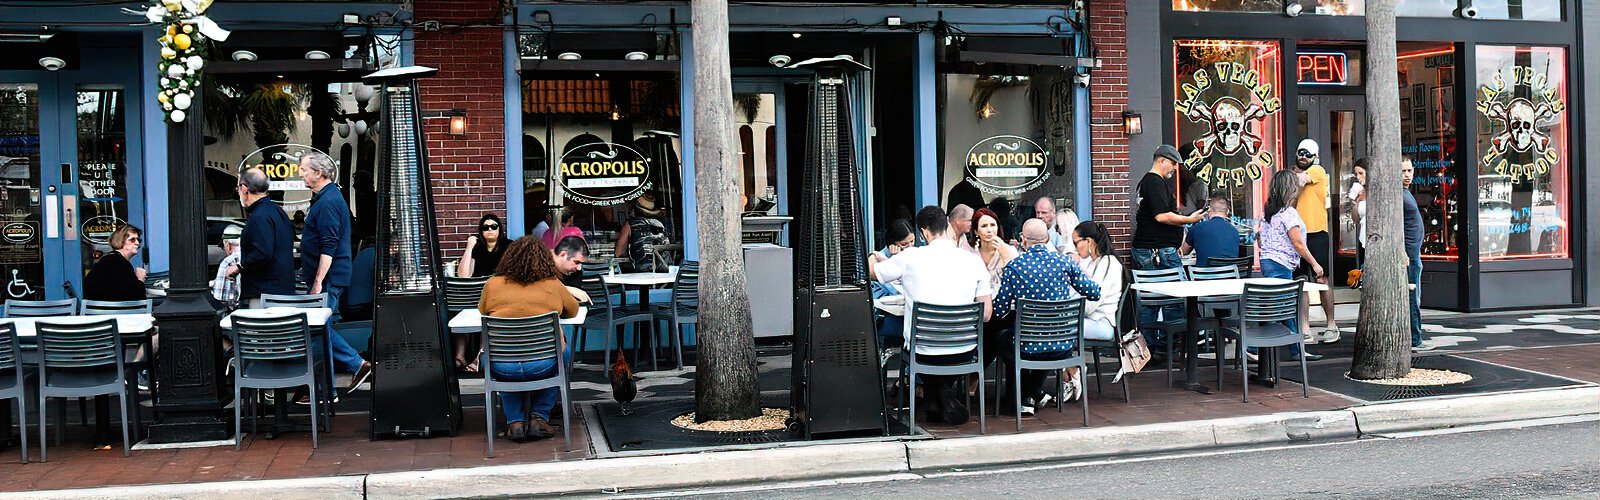 On a beautiful Saturday afternoon, the Acropolis Greek Taverna extends onto the sidewalk to offer their wide selection of Mediterranean food with a touch of sunshine.